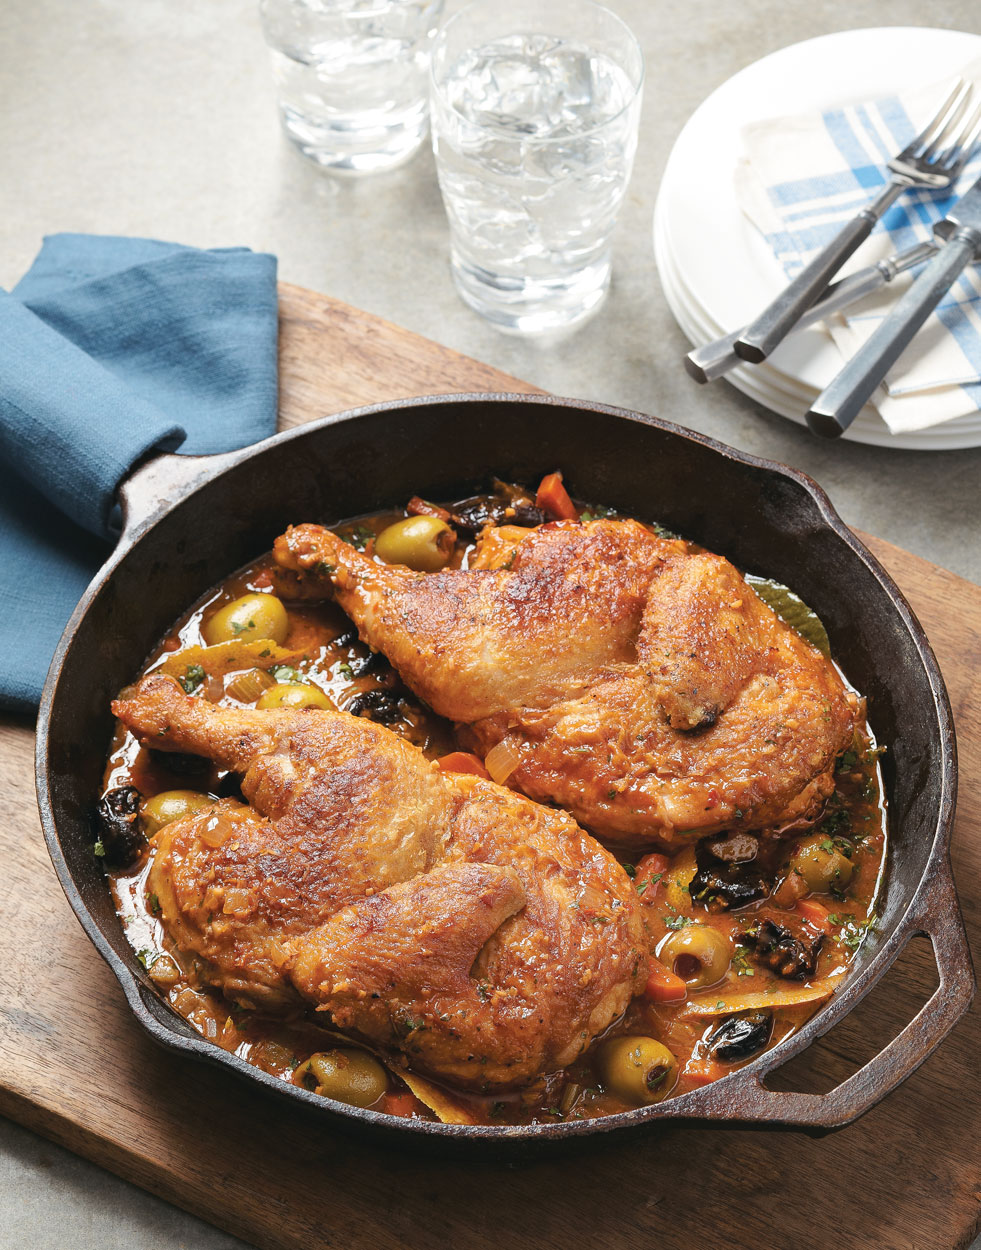 Braised Chicken with Lemon, Olives & Dried Plums Recipe